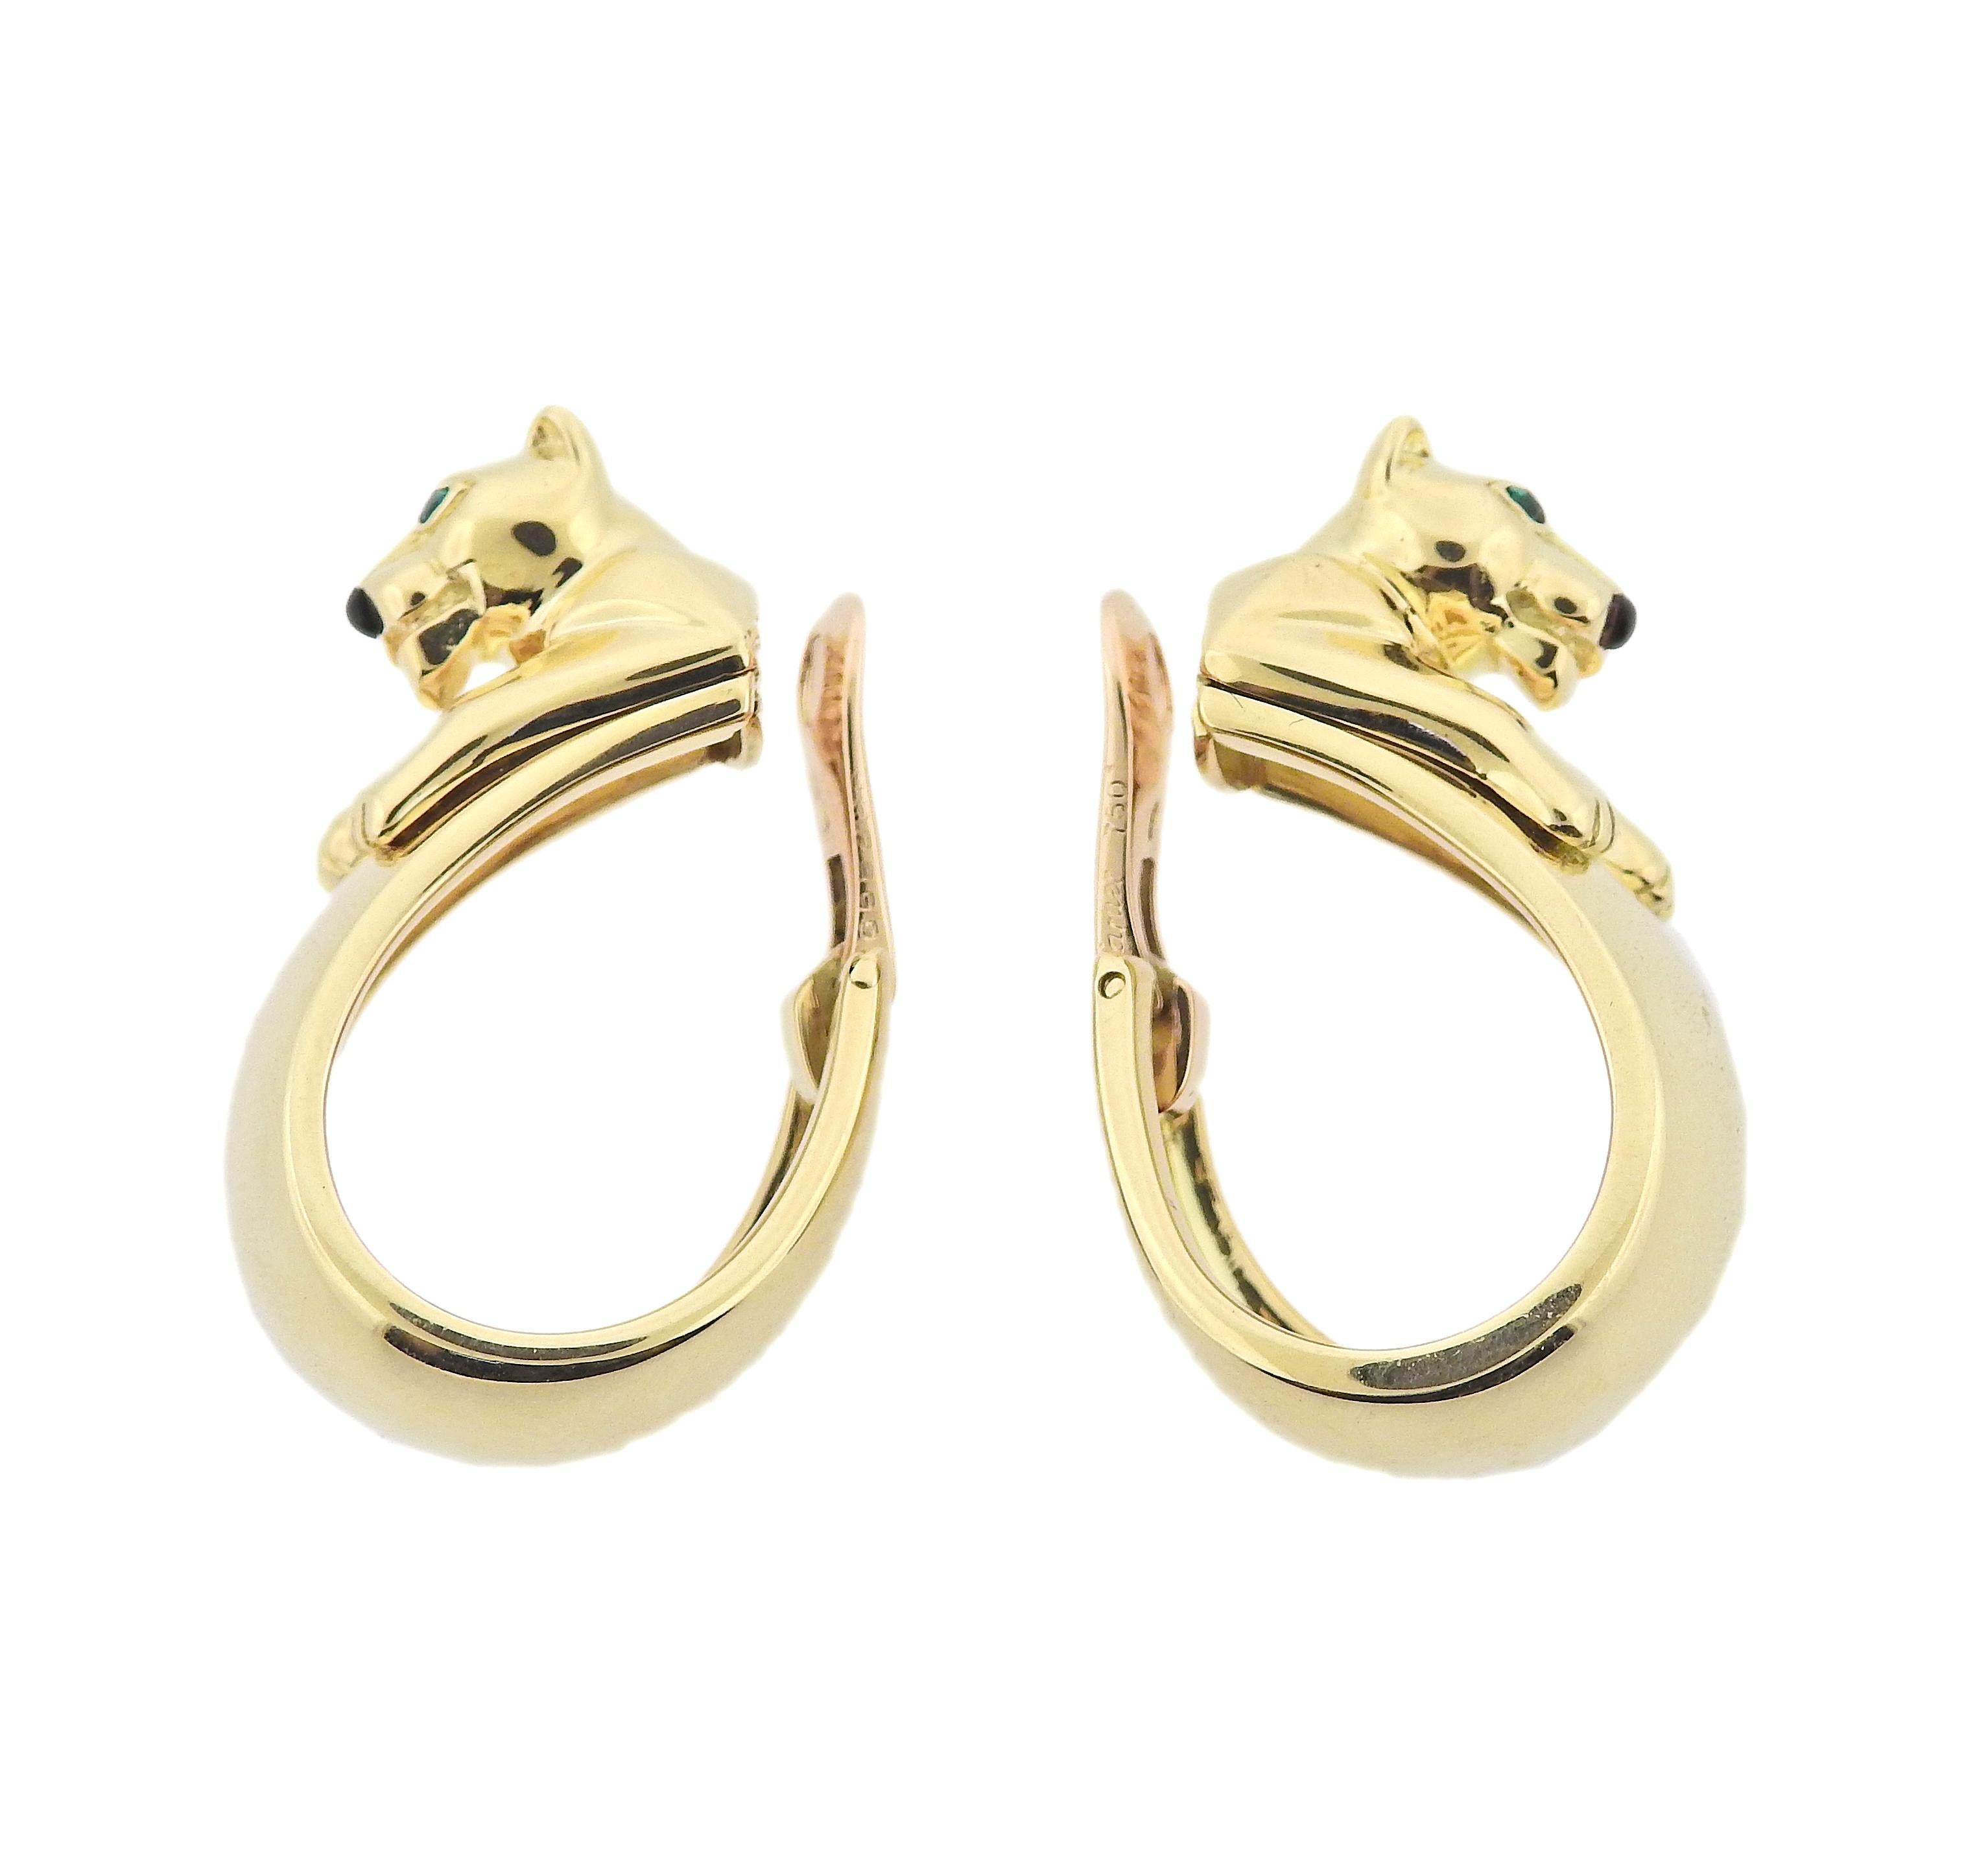 Pair of classic Panthere hoop 18k gold earrings by Cartier, with emerald eyes and onyx nose. Earrings are 35mm x 15mm. Marked 622899, Cartier, 750. Weight 43.3 grams. 